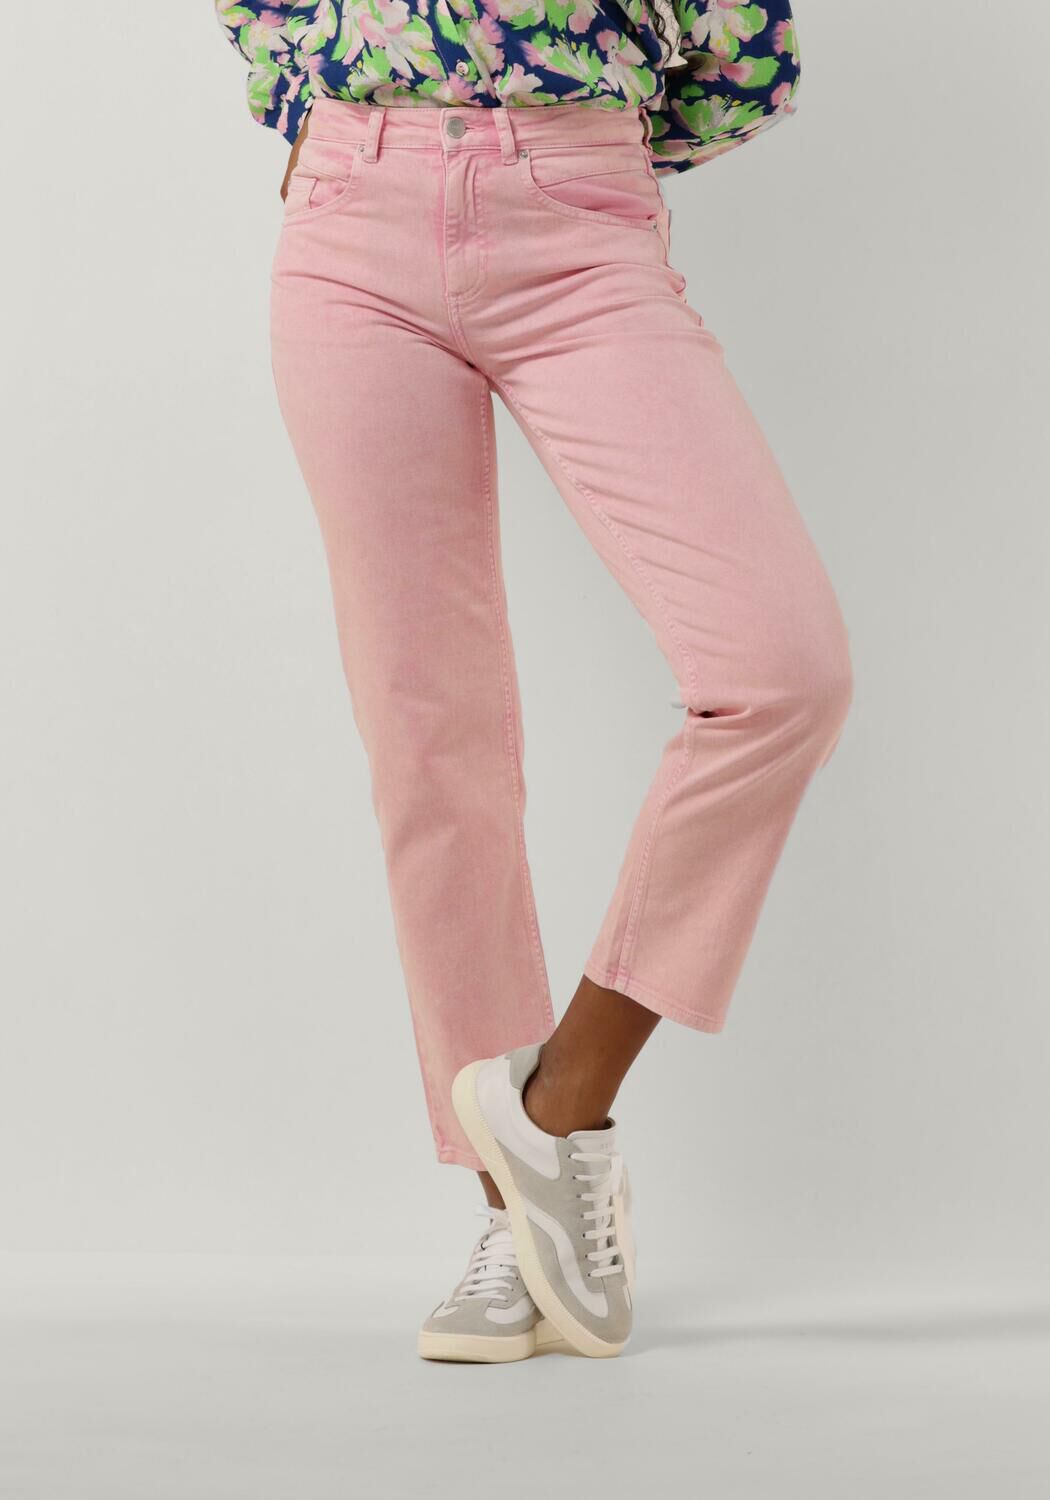 POM AMSTERDAM Dames Jeans Elli Straight Blooming Pink Jeans Roze